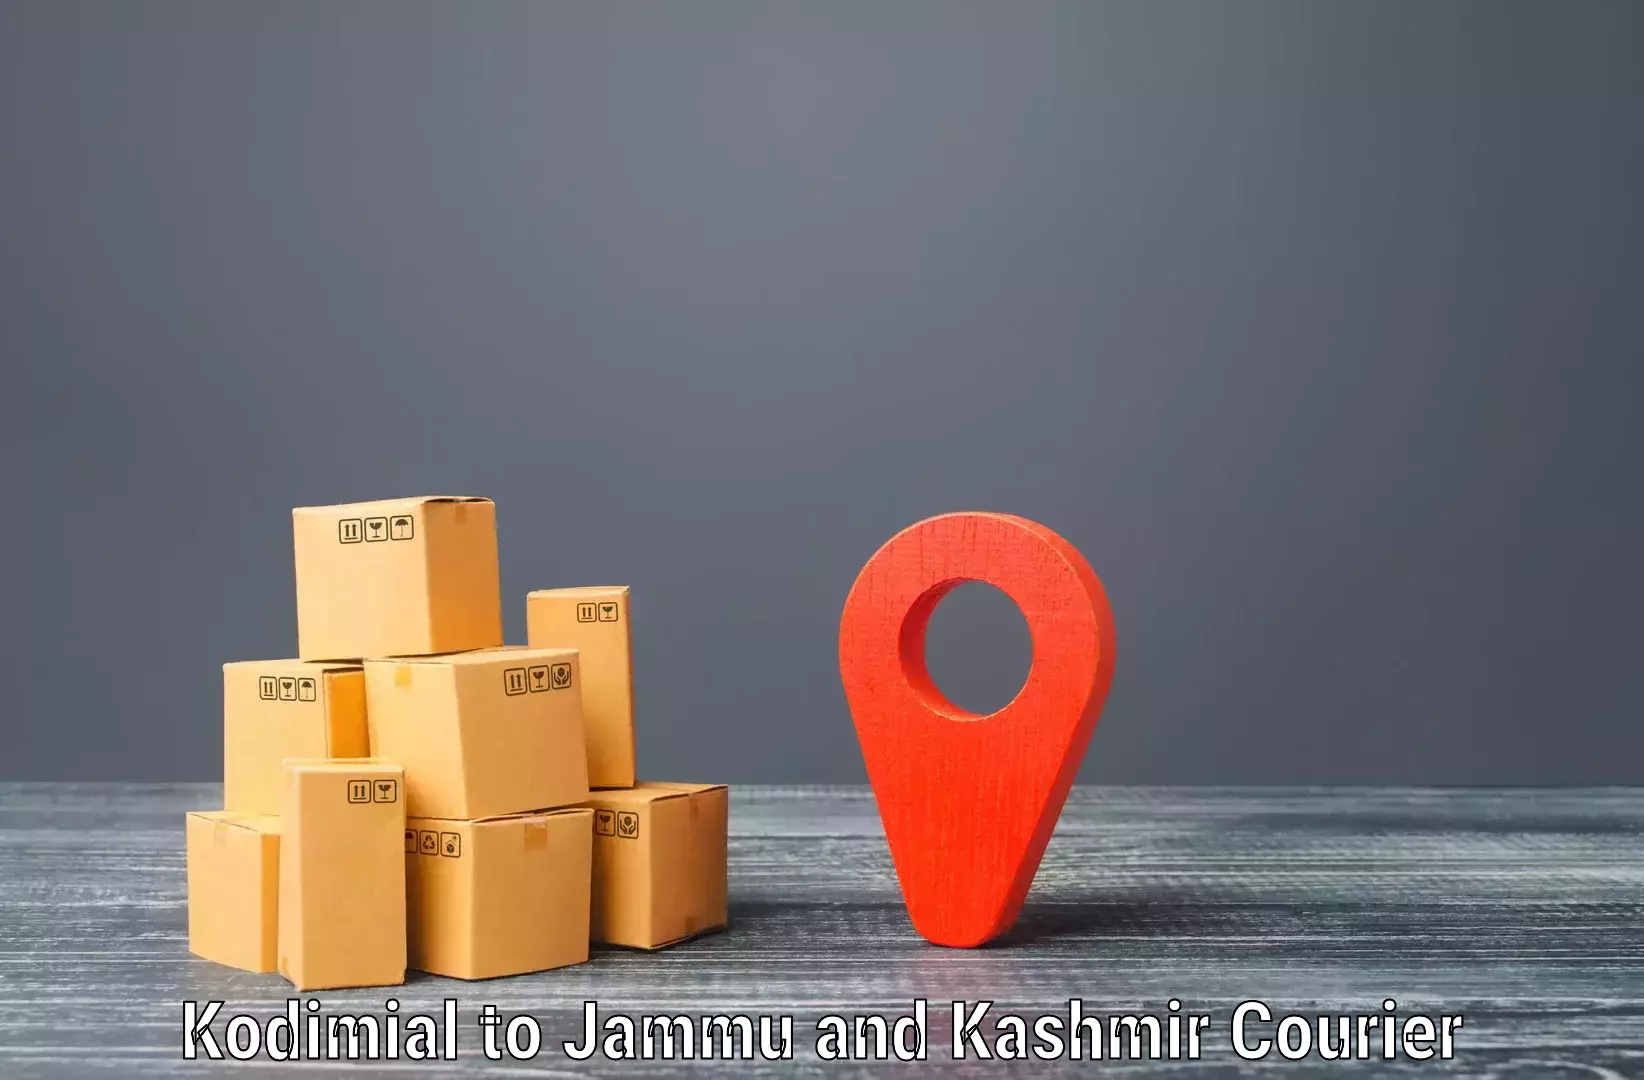 Air courier services Kodimial to Udhampur